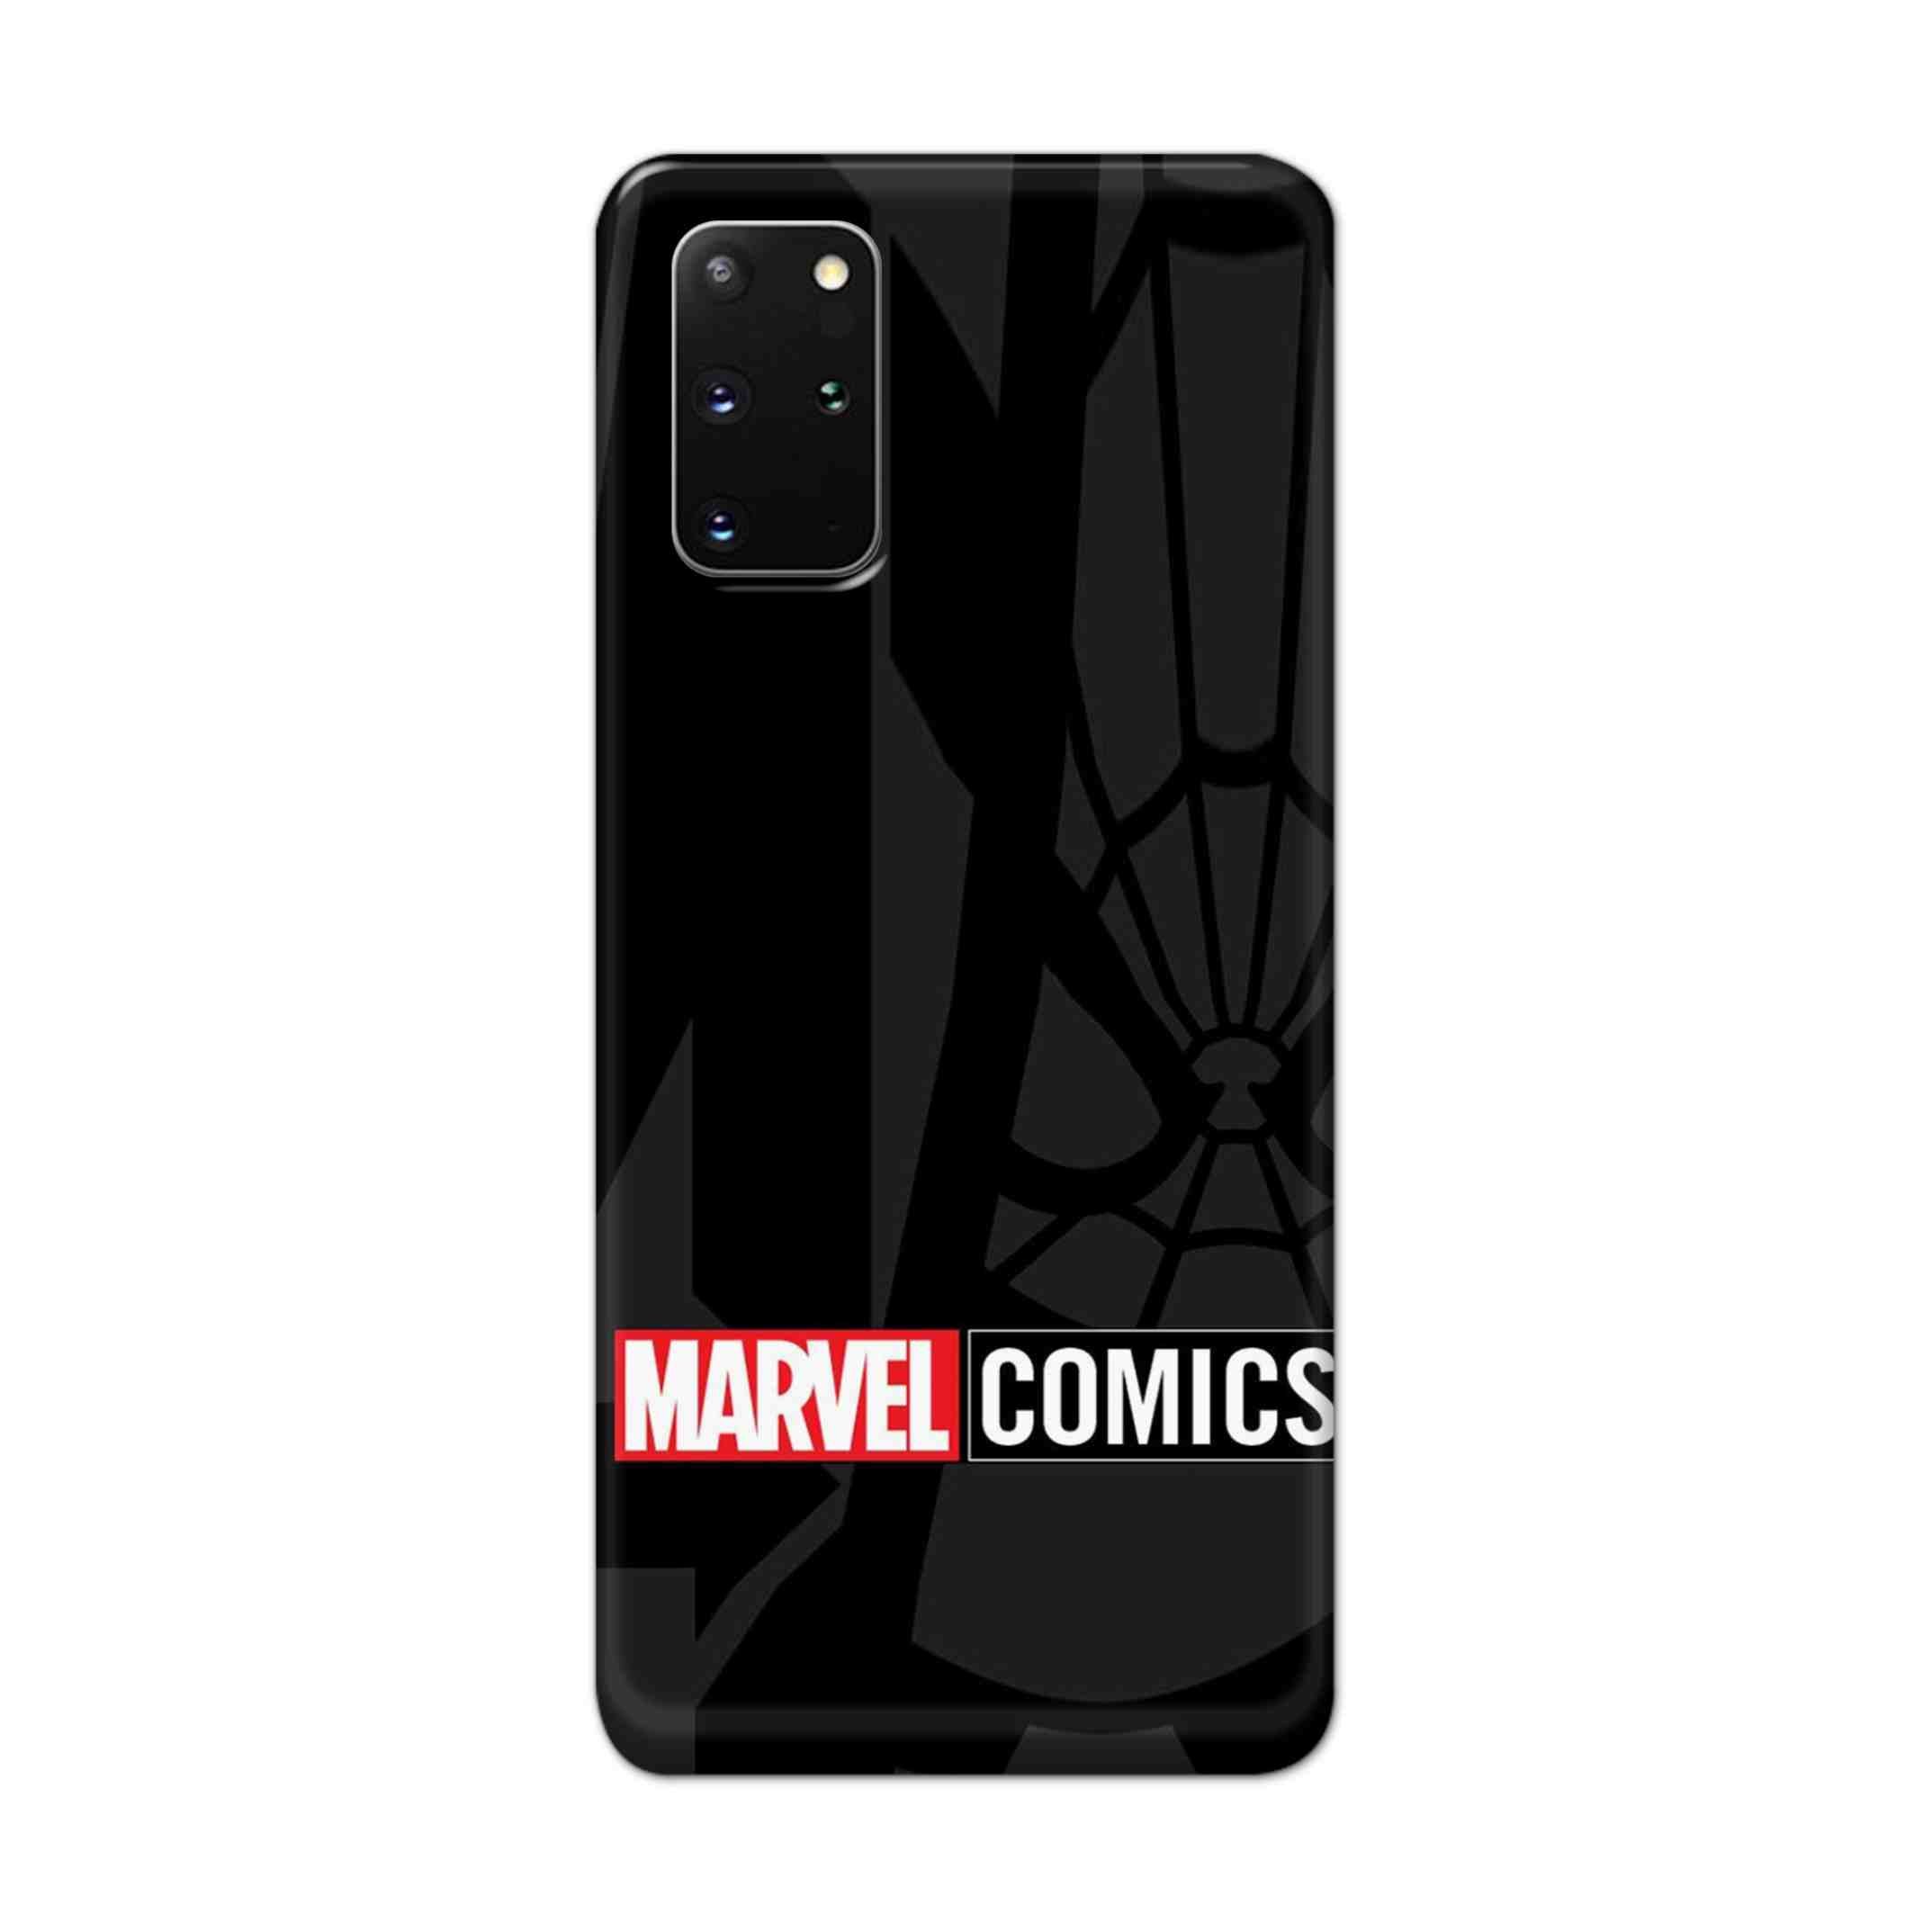 Buy Marvel Comics Hard Back Mobile Phone Case Cover For Samsung Galaxy S20 Plus Online